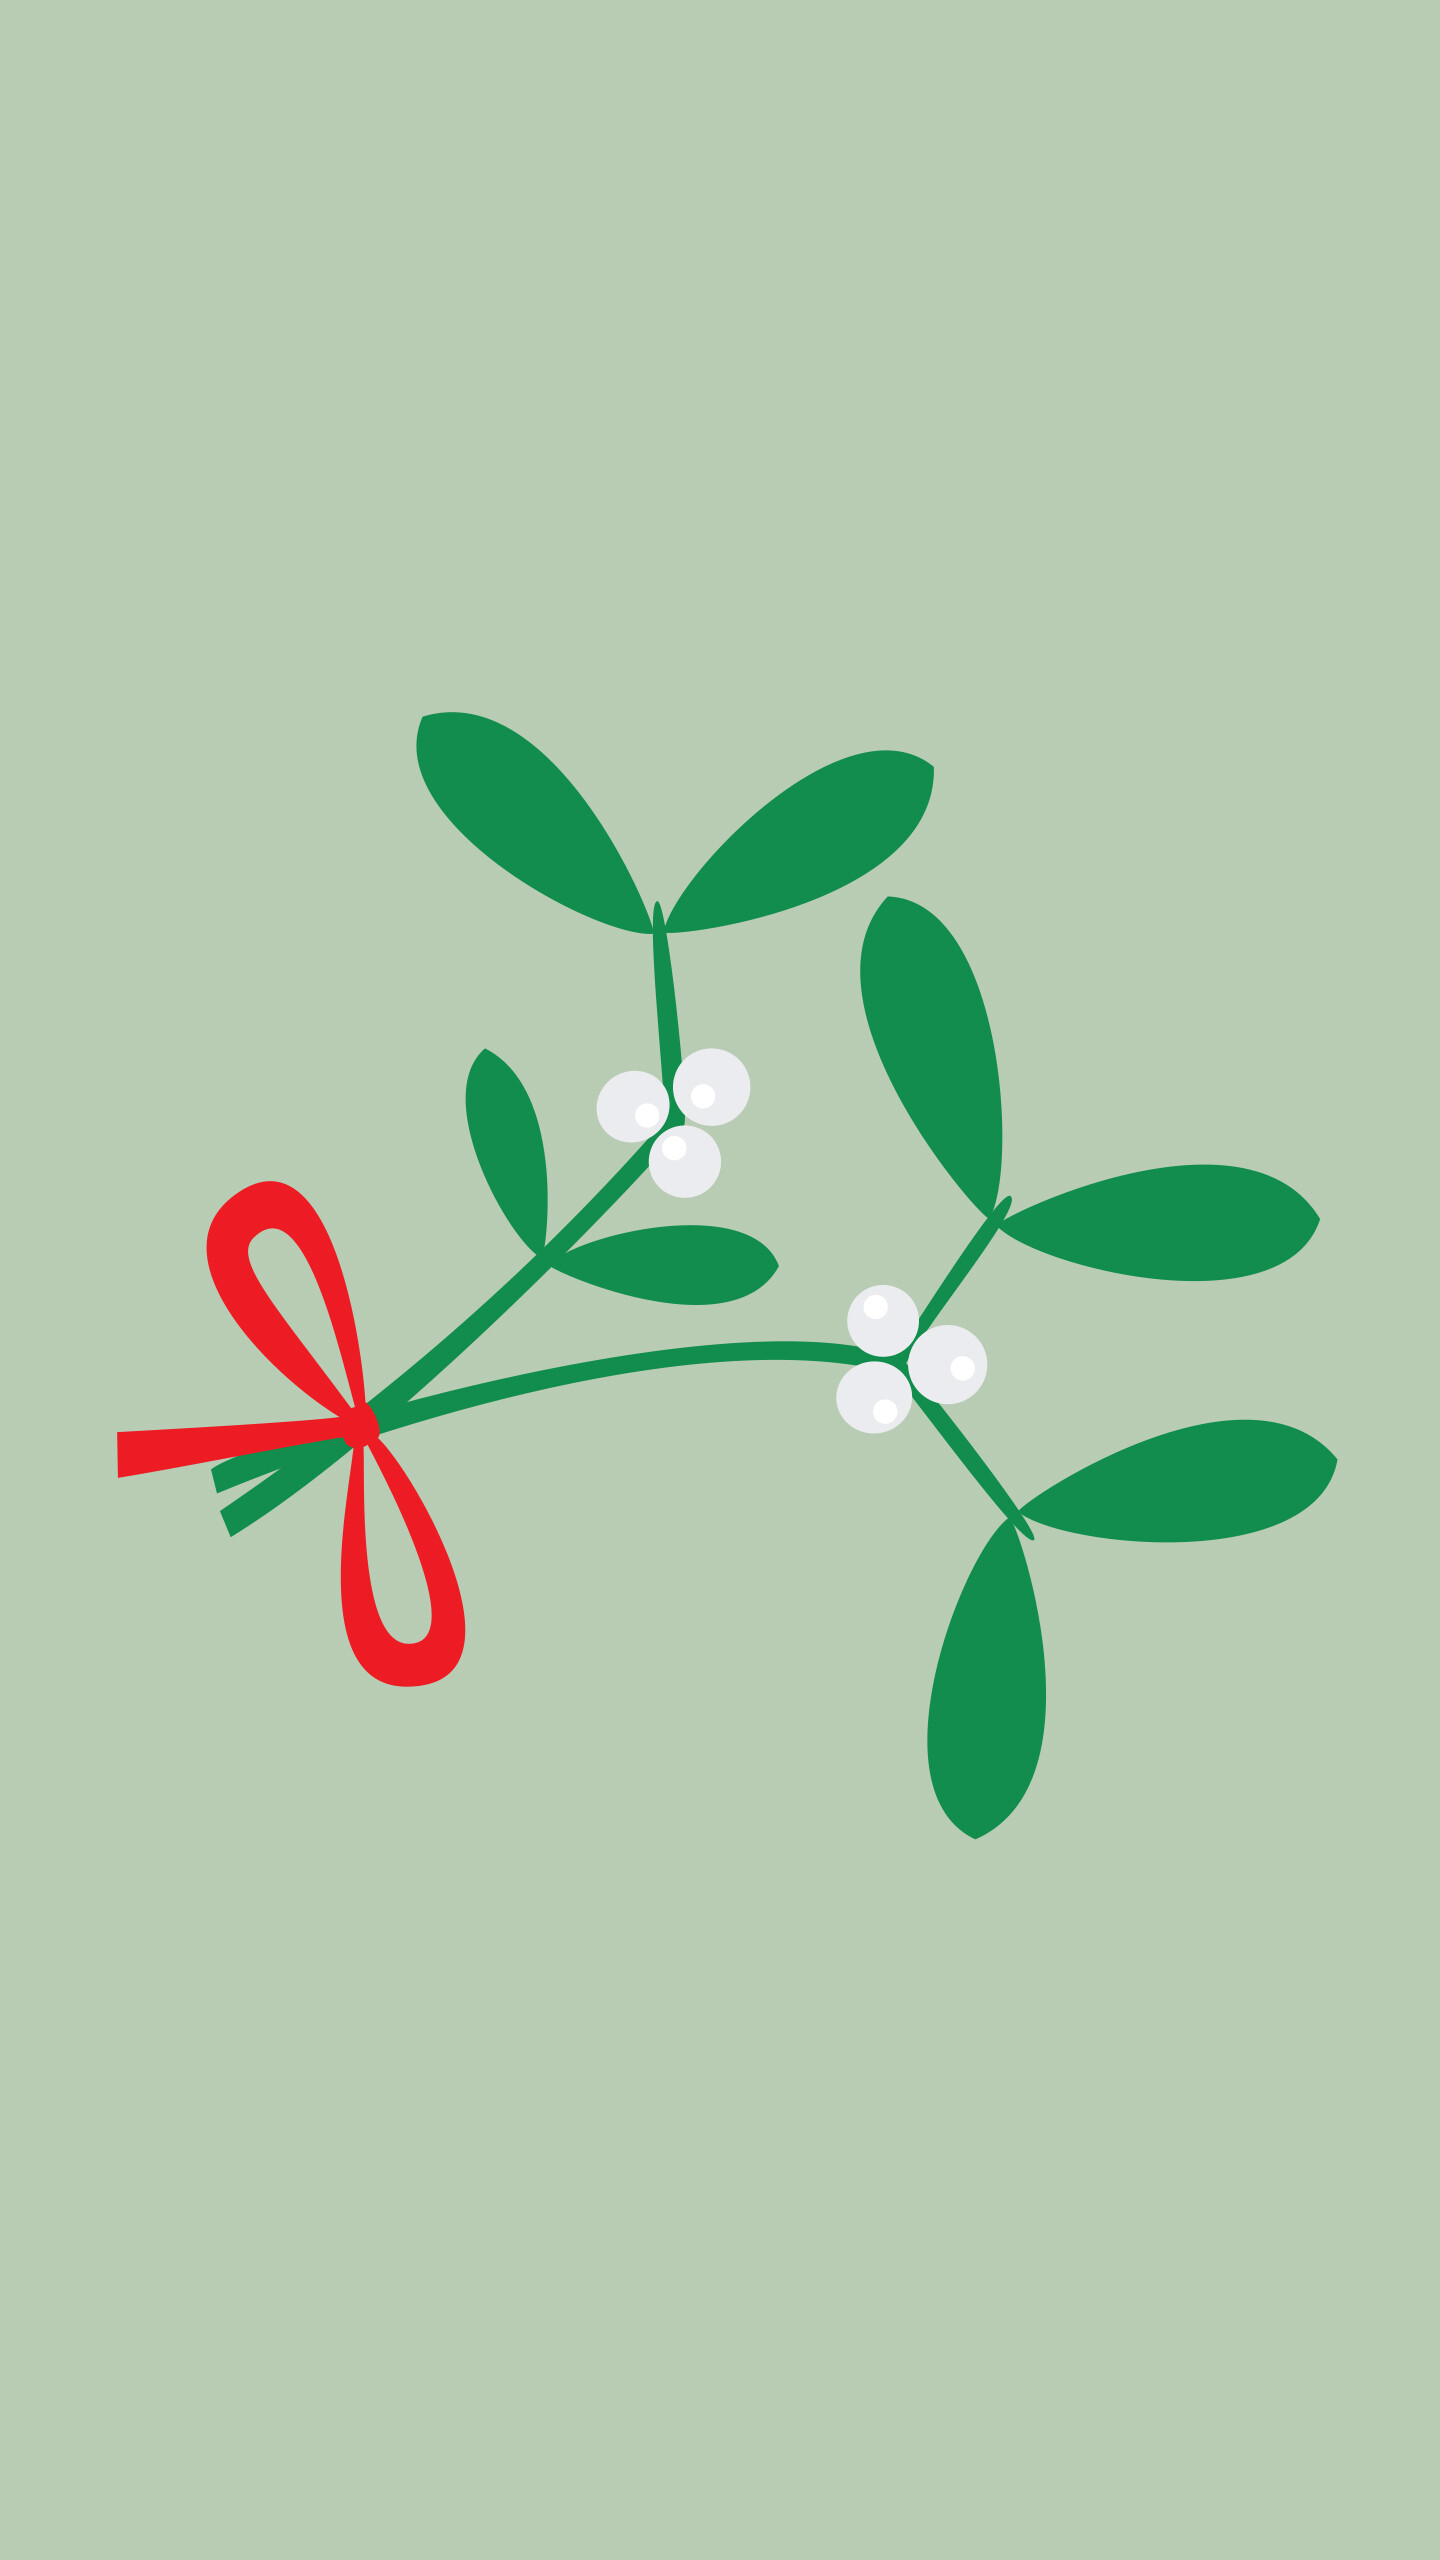 Mistletoe: Man is allowed to kiss any woman standing underneath it, and bad luck would befall any woman who refused the kiss. 1440x2560 HD Wallpaper.